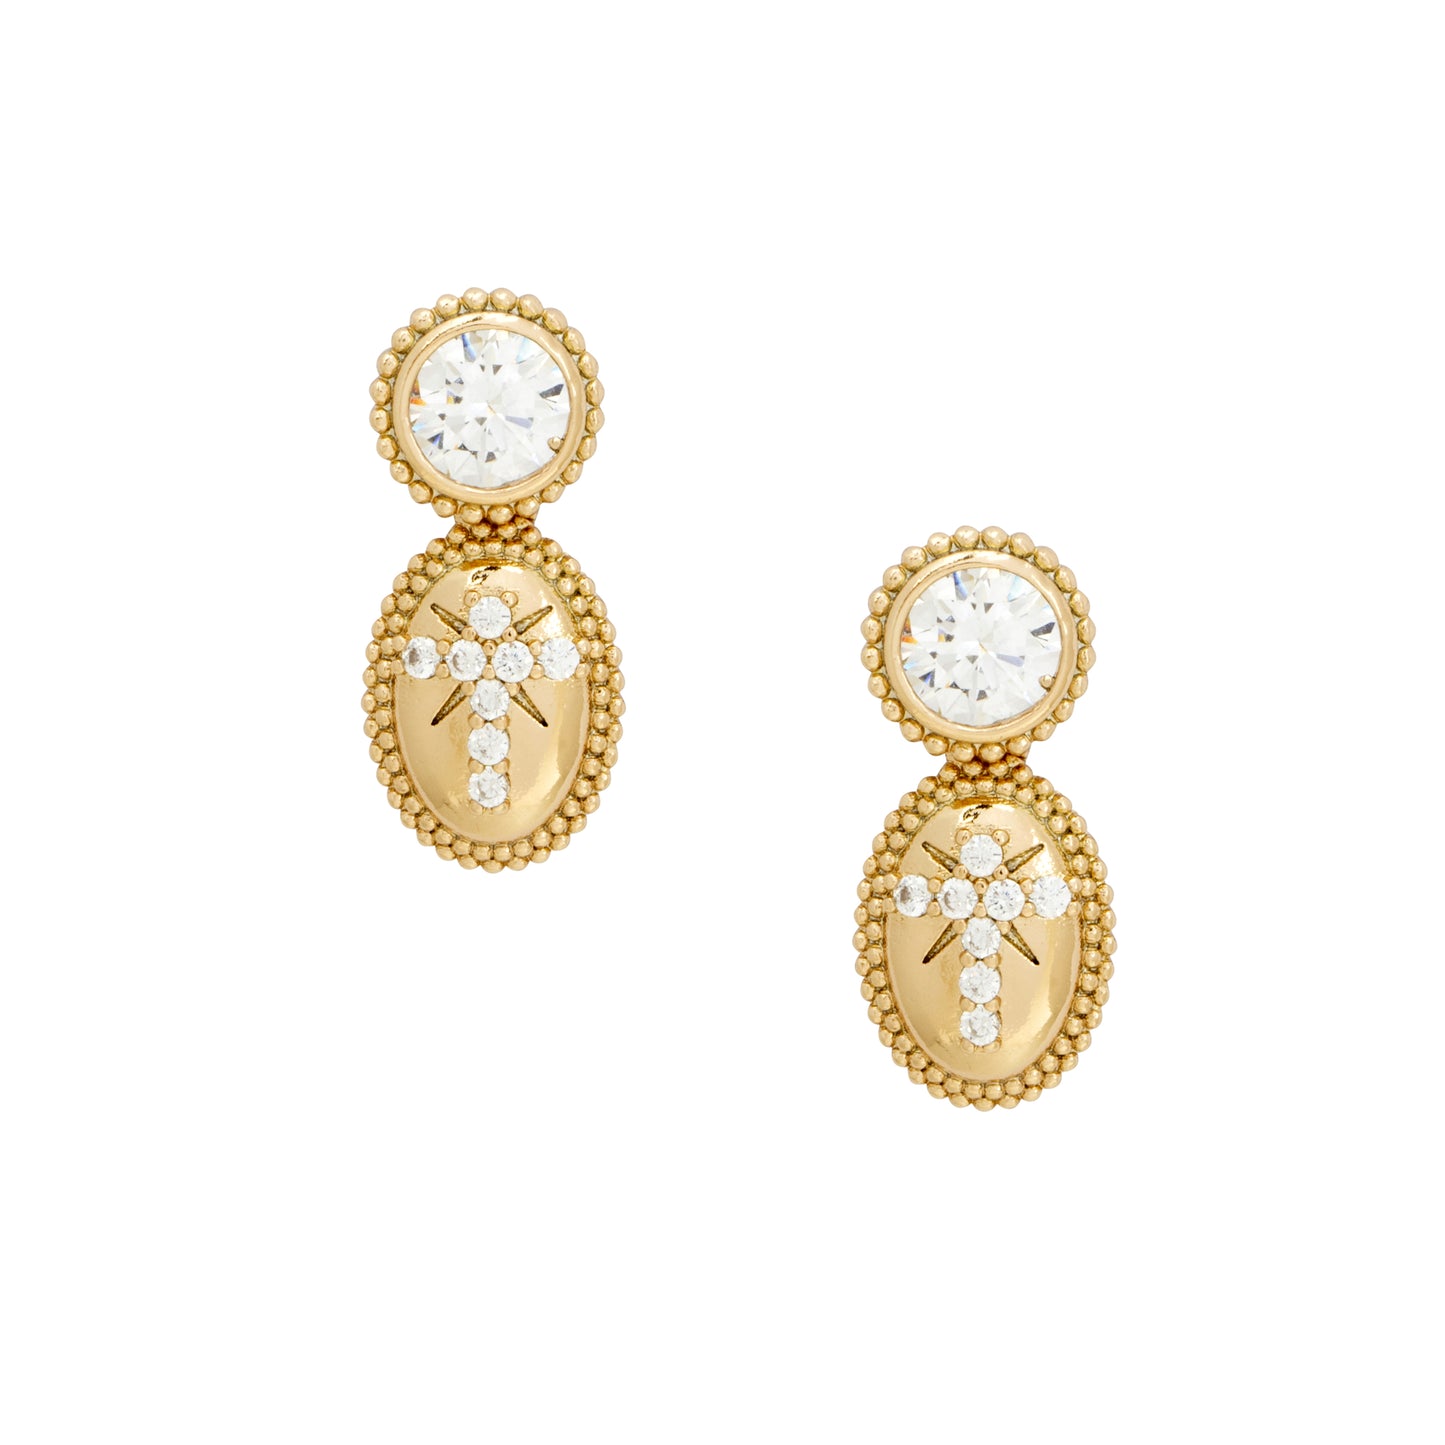 18ct Gold Toned Earrings with a Sparkling Brilliant Cut Central Stone - Love & Lilly Jewellery